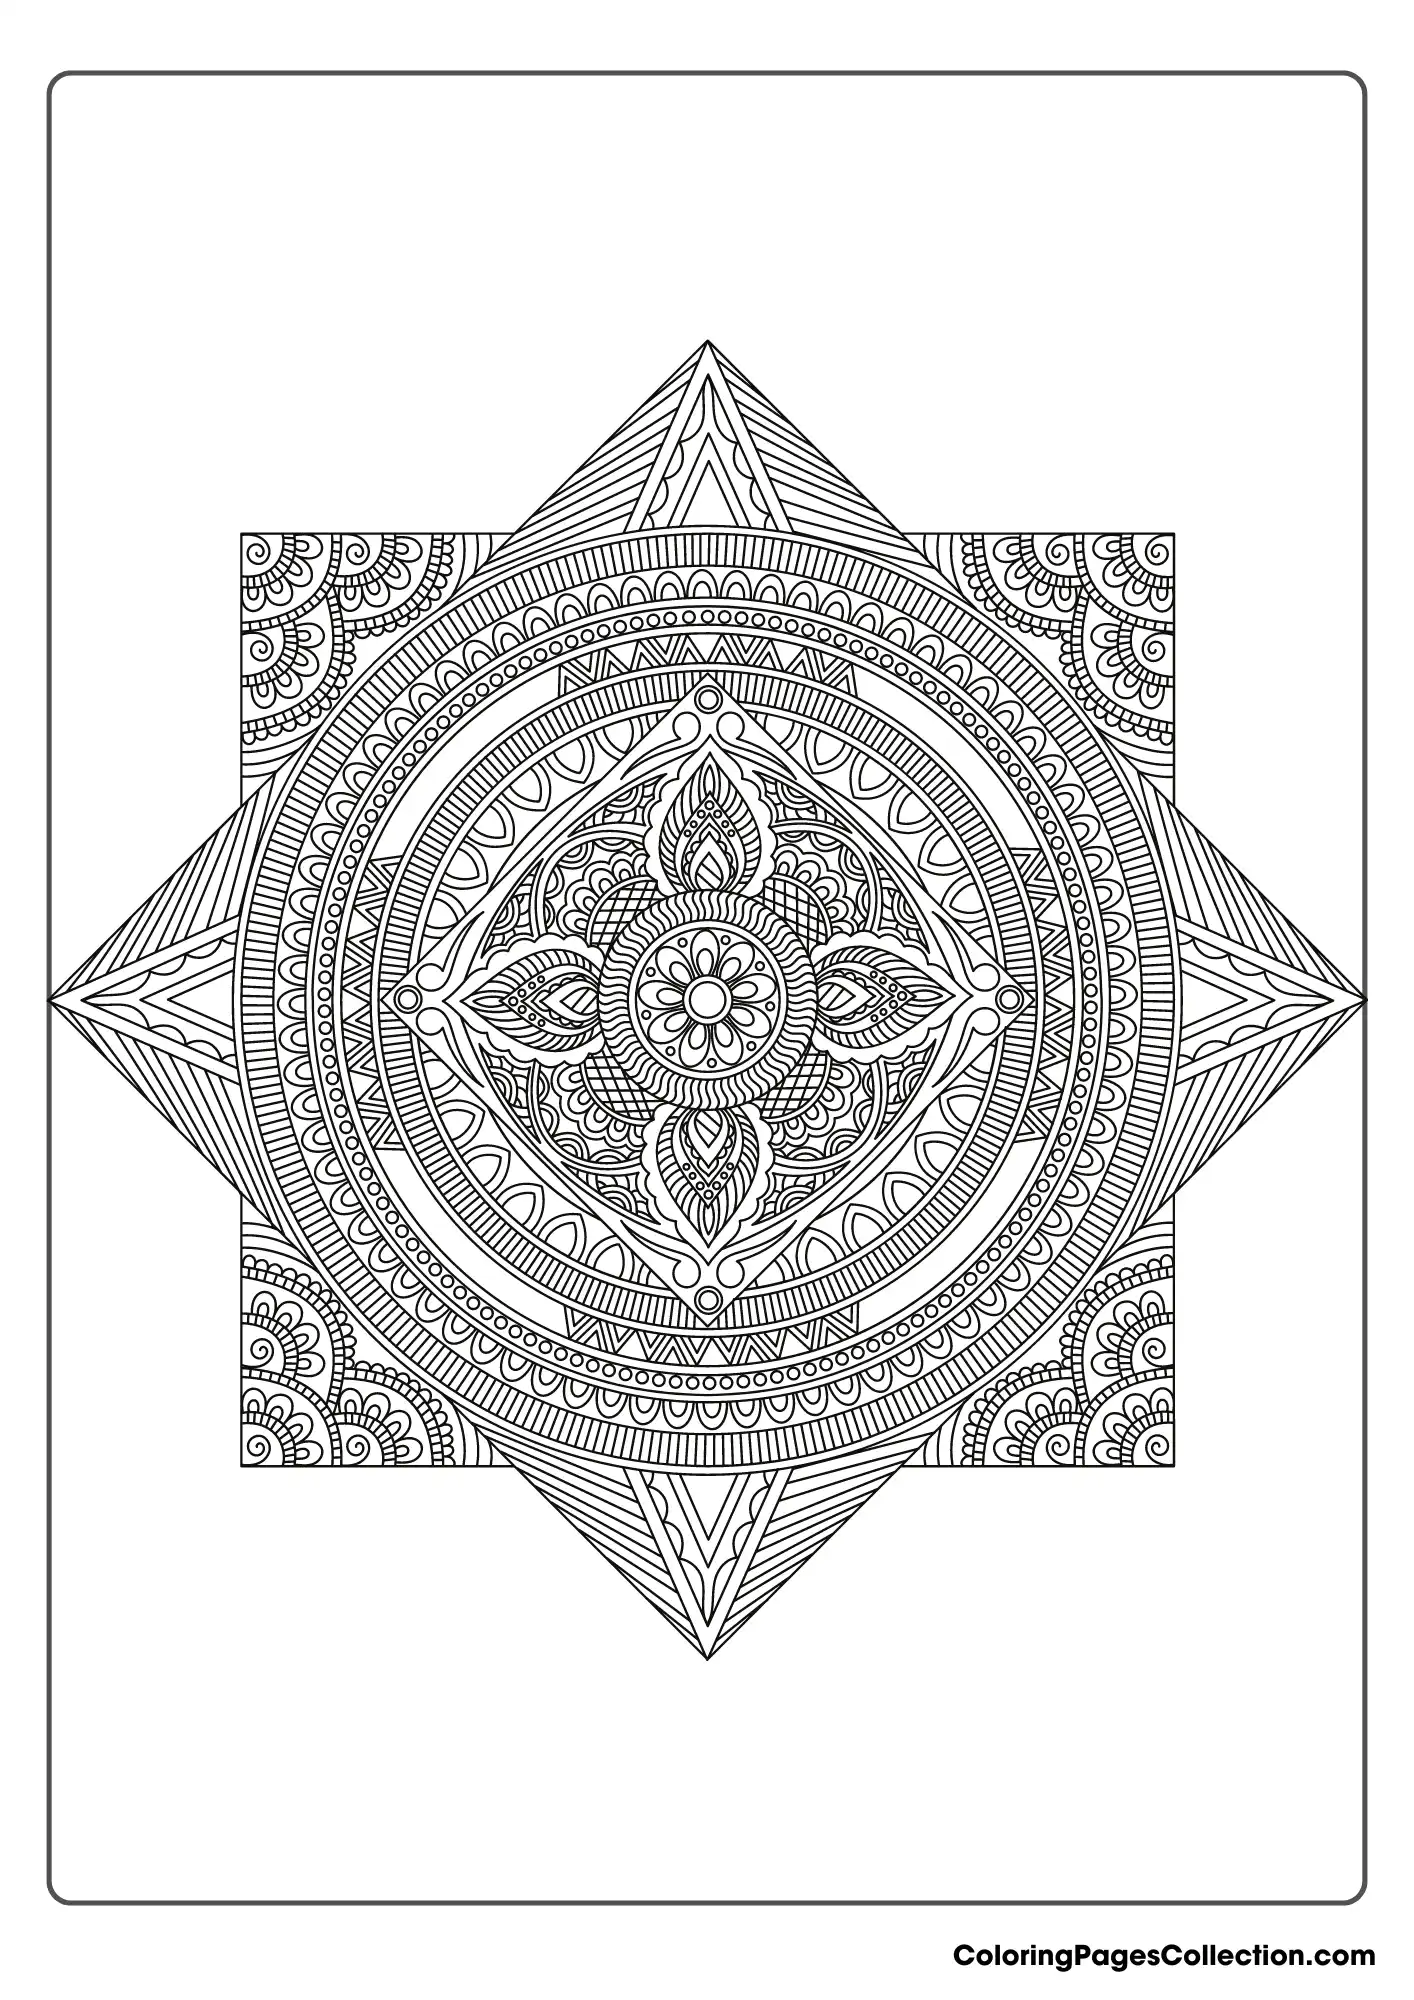 Coloring pages for teens, Mandala Design